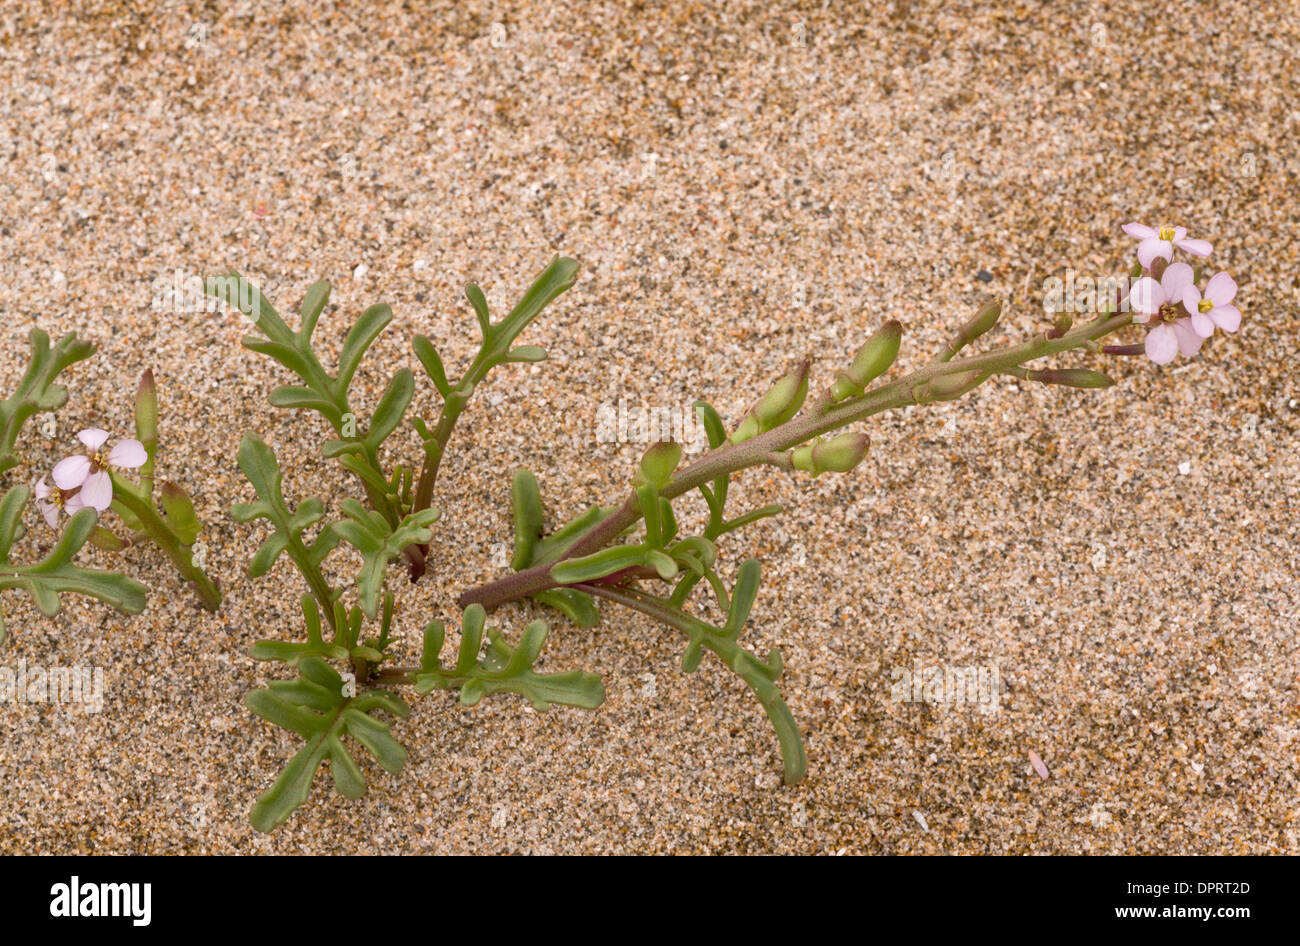 Sea rocket, Cakile maritima in flower and fruit, on sand. Stock Photo